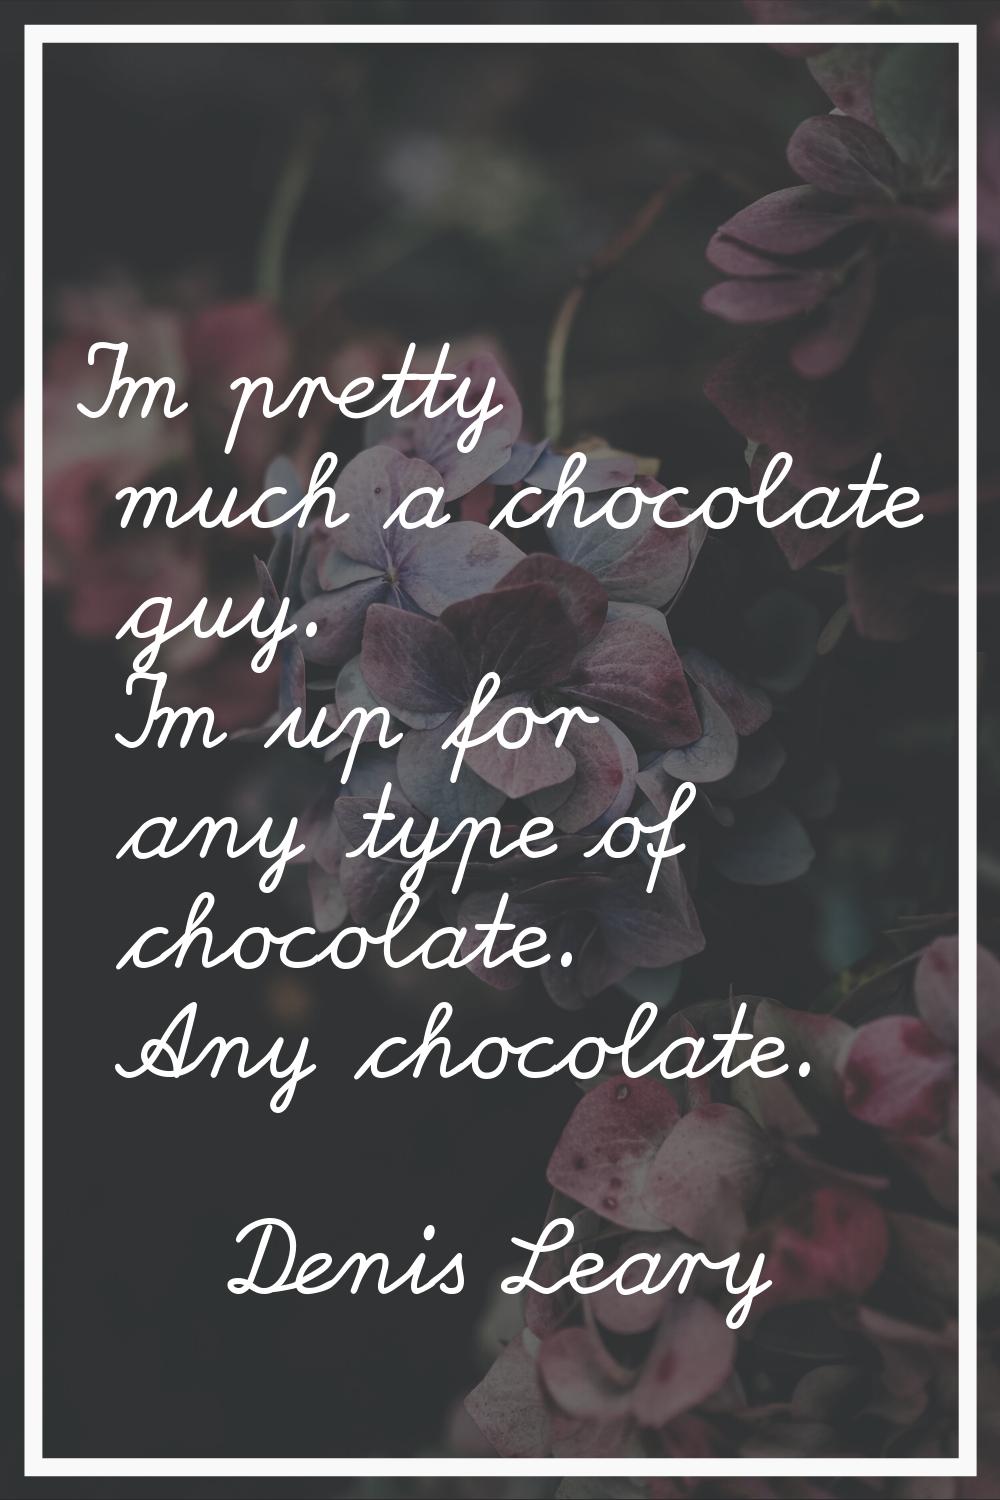 I'm pretty much a chocolate guy. I'm up for any type of chocolate. Any chocolate.